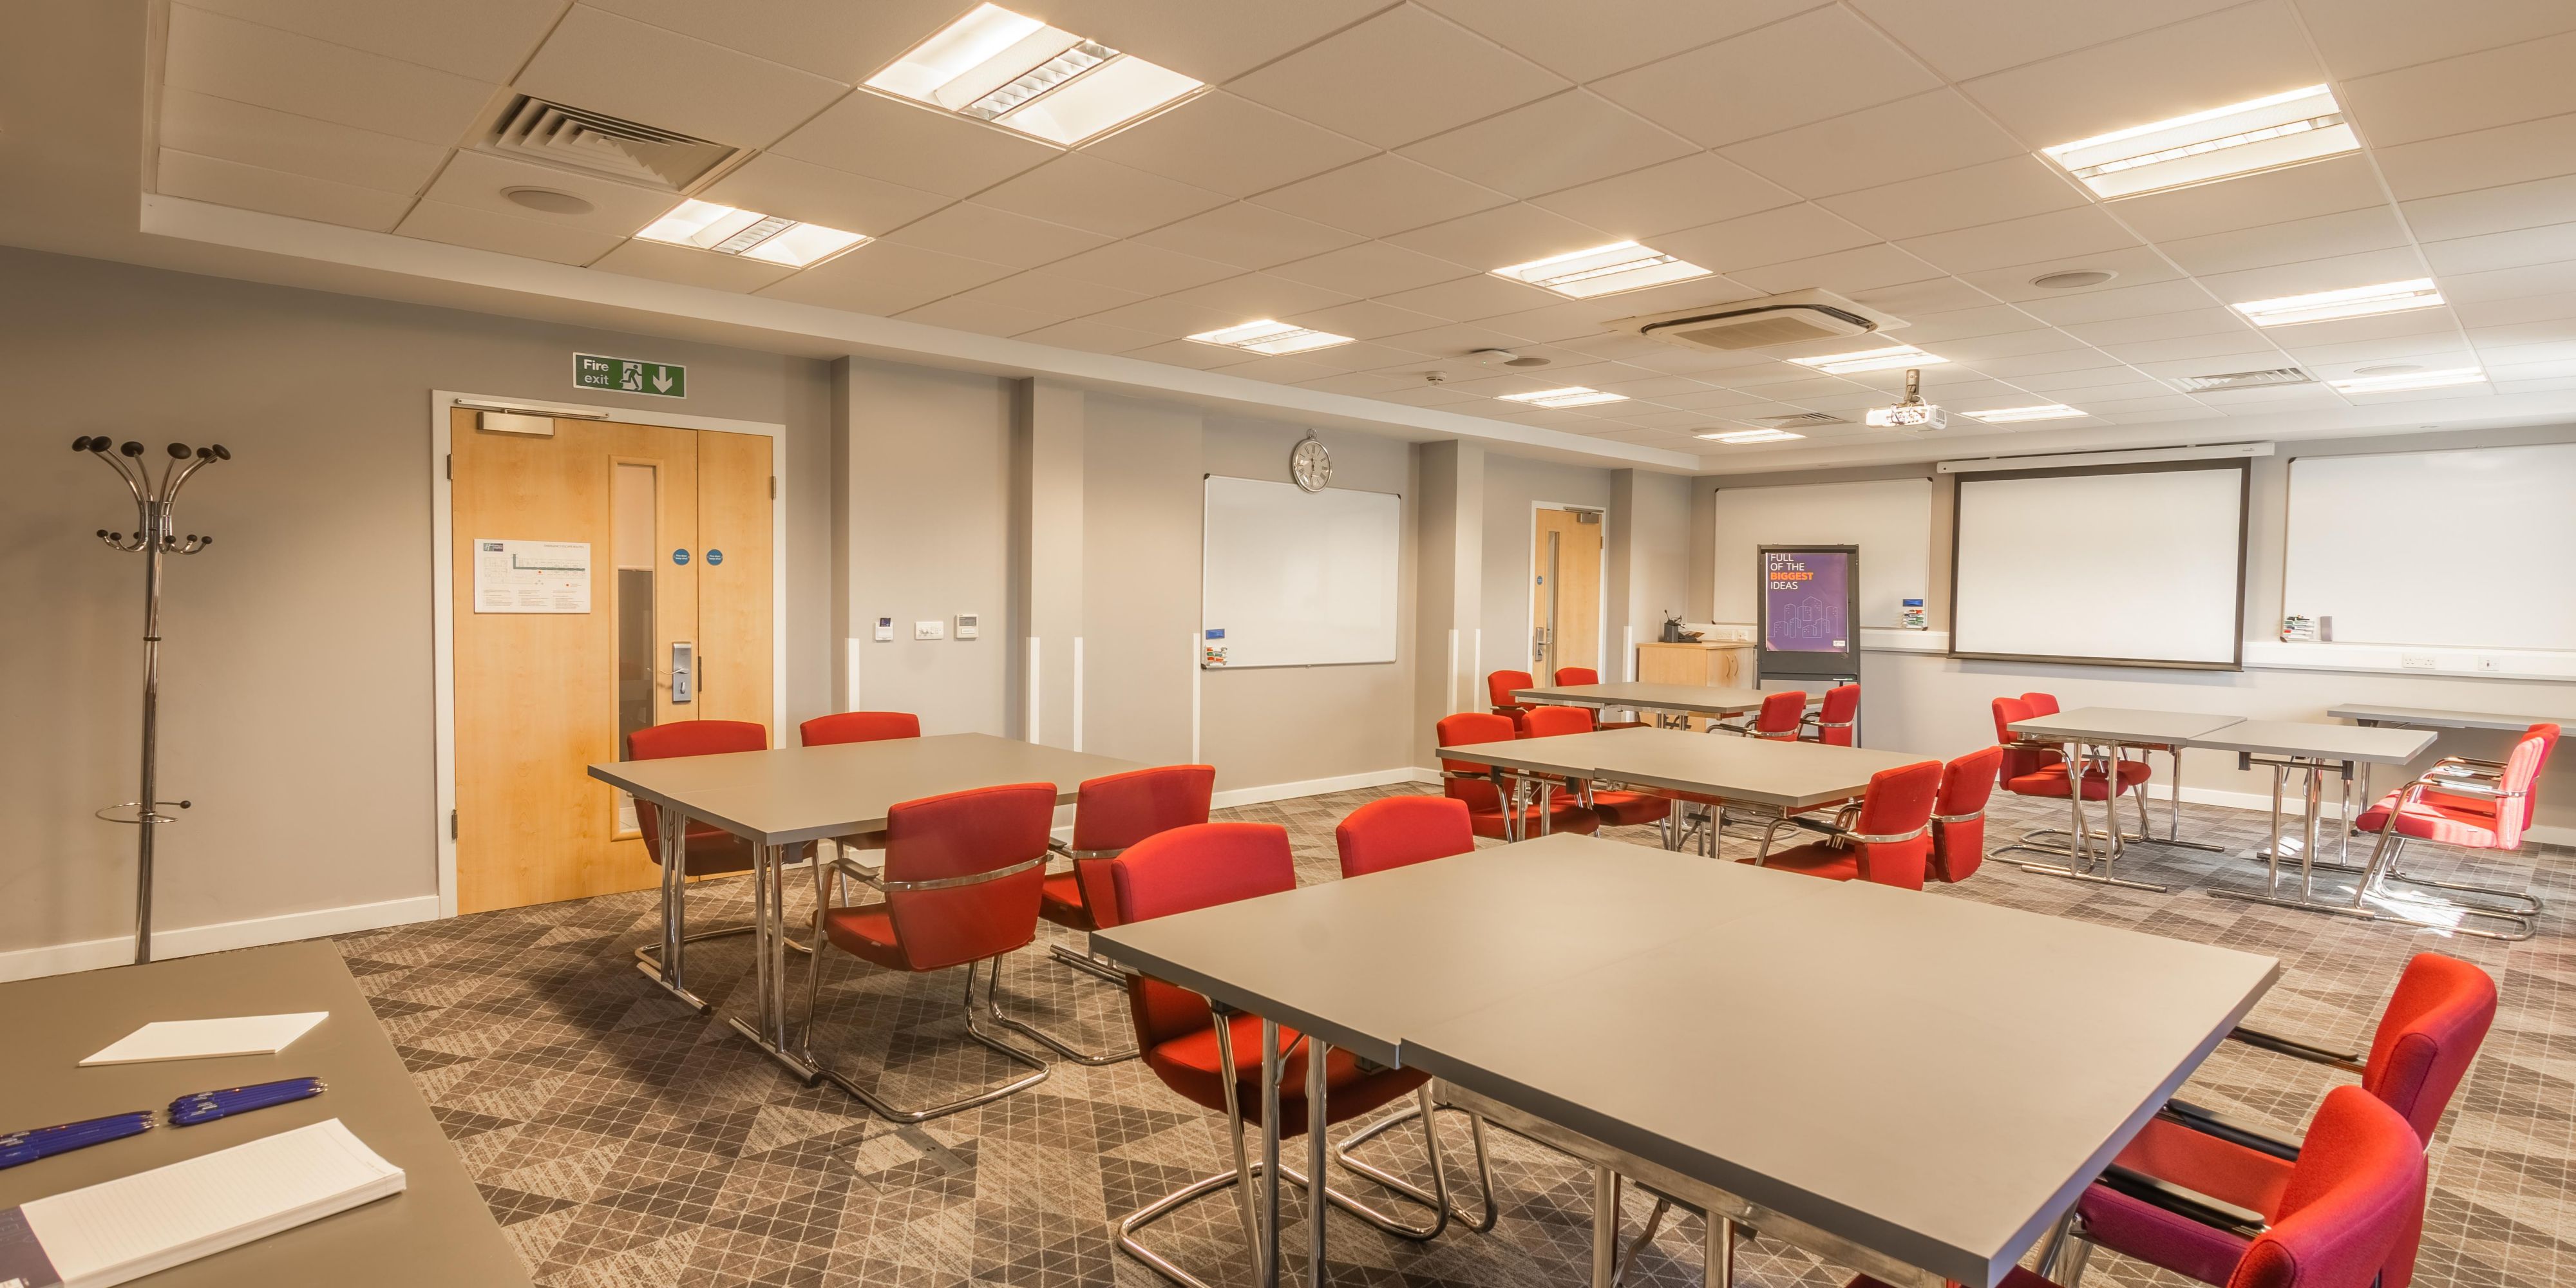 We have 3 meeting rooms with a maximum capacity of 55. All with natural daylight and free Wifi, LCD Projector and Screen as well as free parking. Discounted meeting room hire is available when you book bedrooms for your meeting. Please contact our sales team for more details.